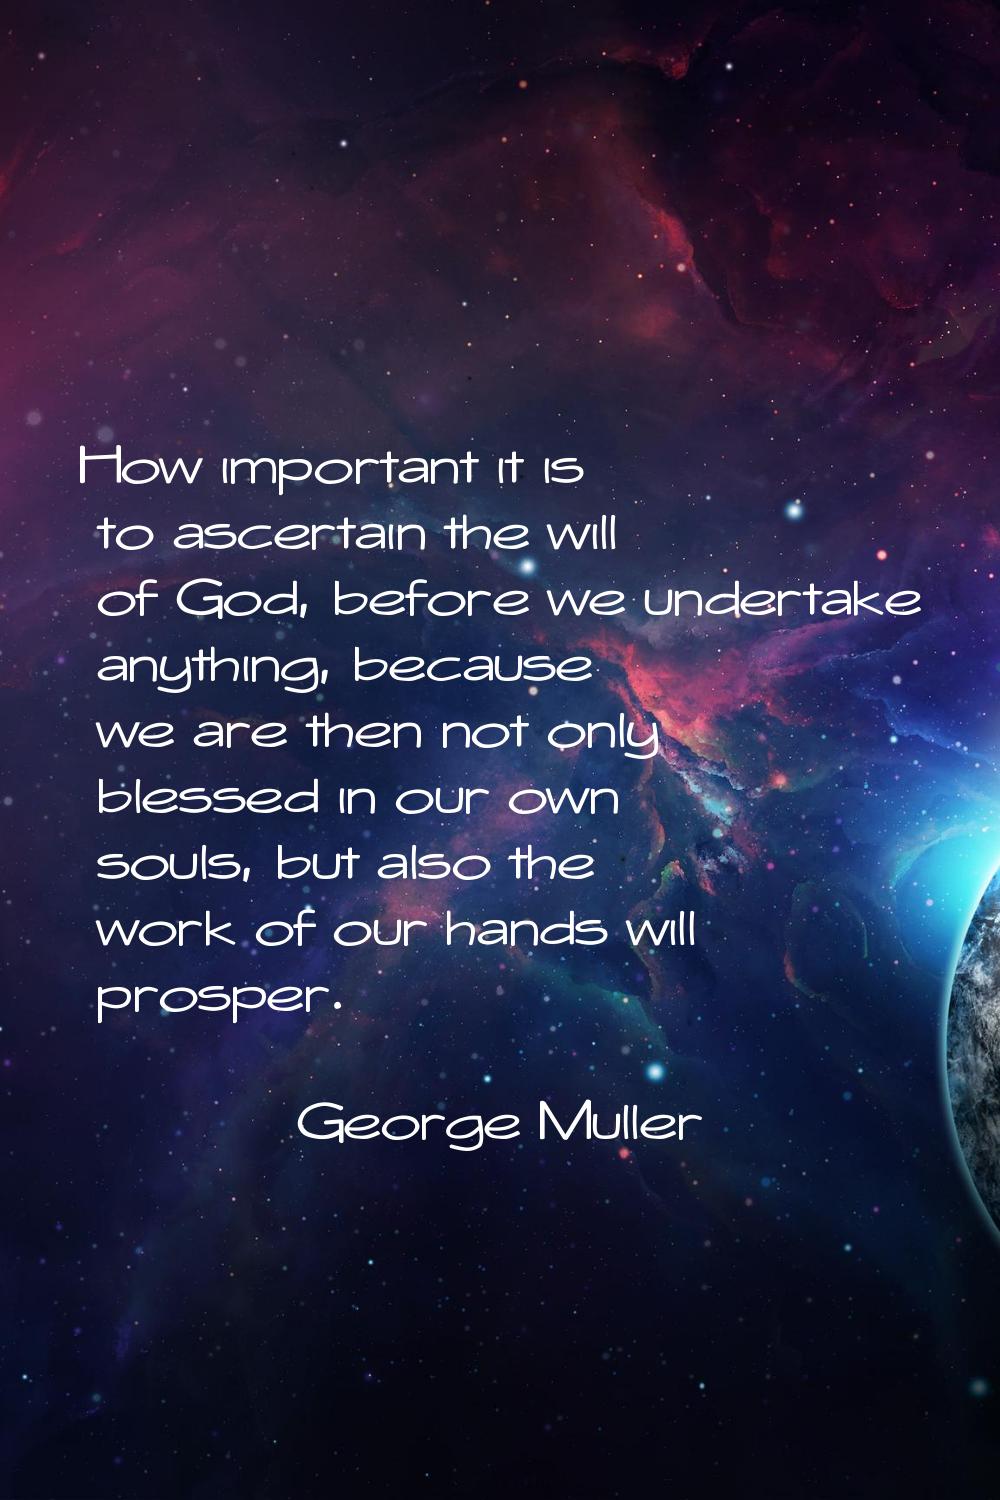 How important it is to ascertain the will of God, before we undertake anything, because we are then